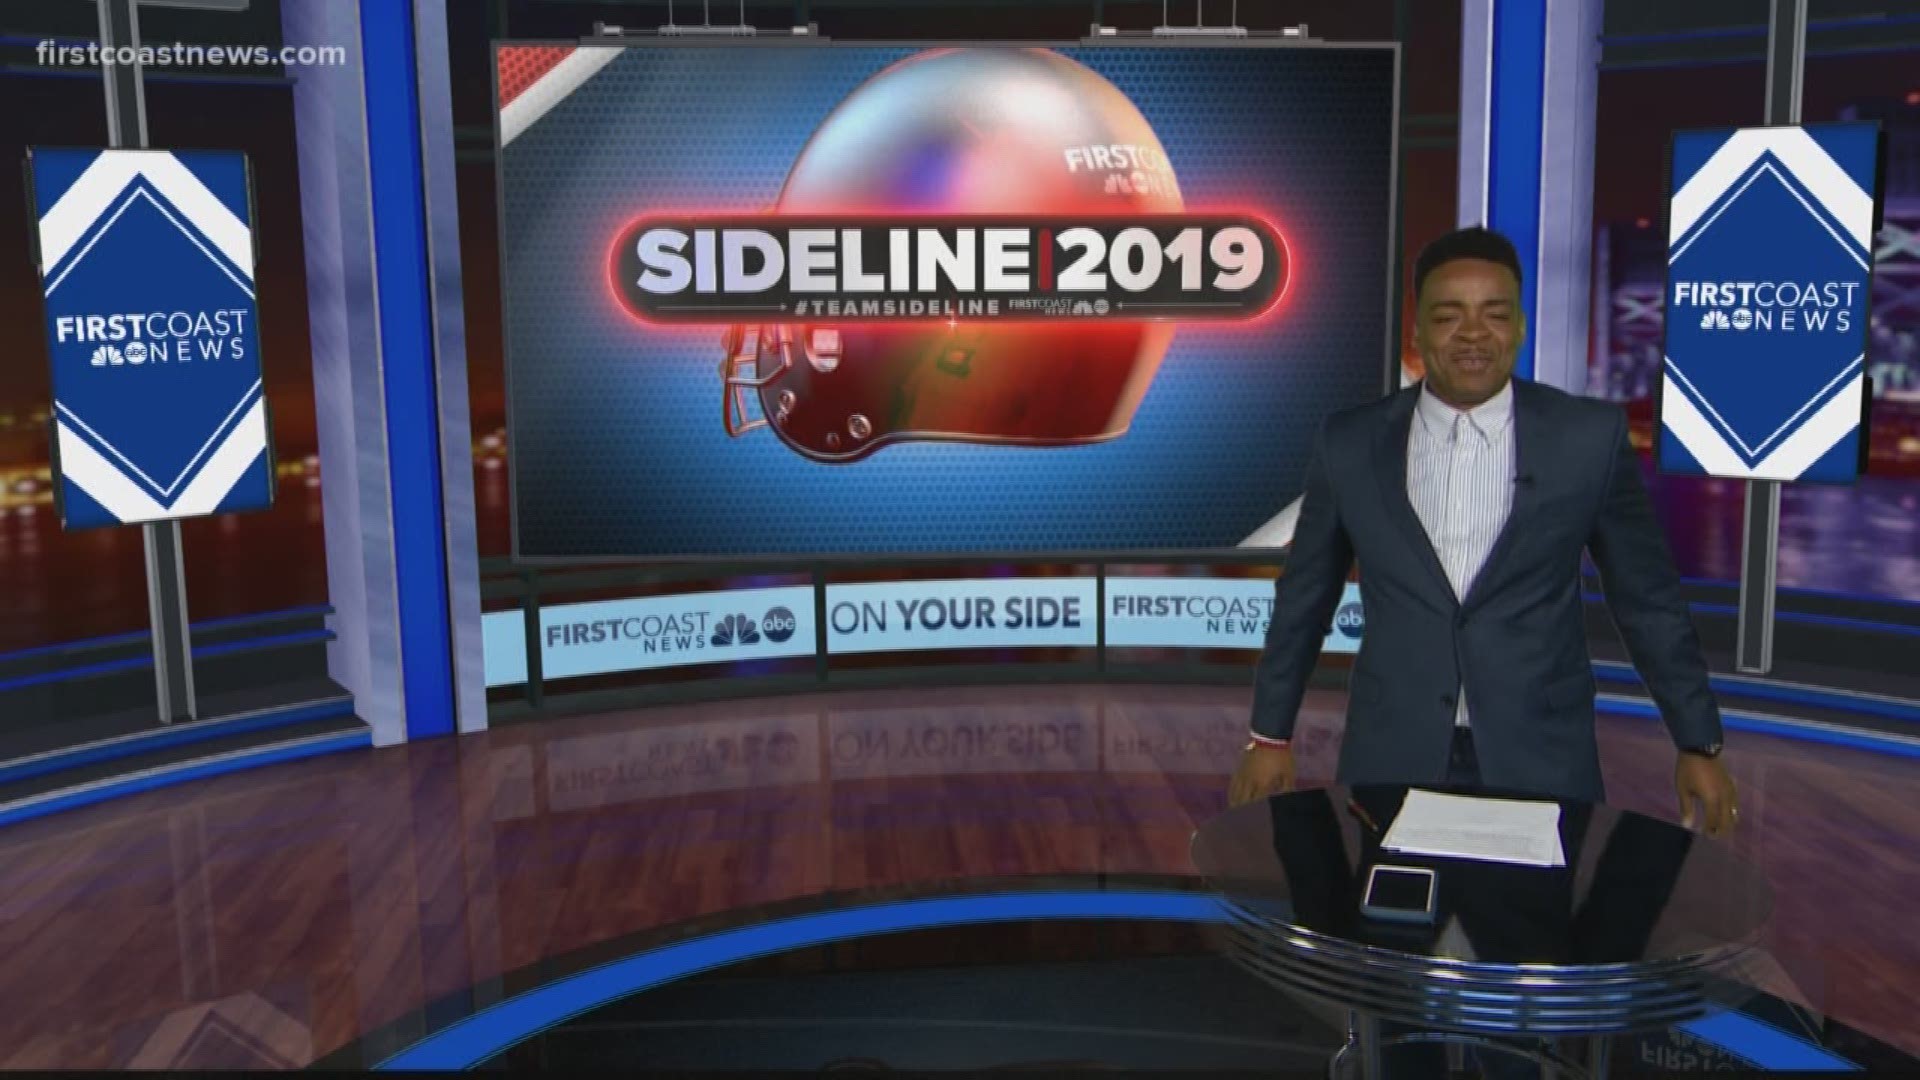 Part two of Sideline 2019's round two of the playoffs